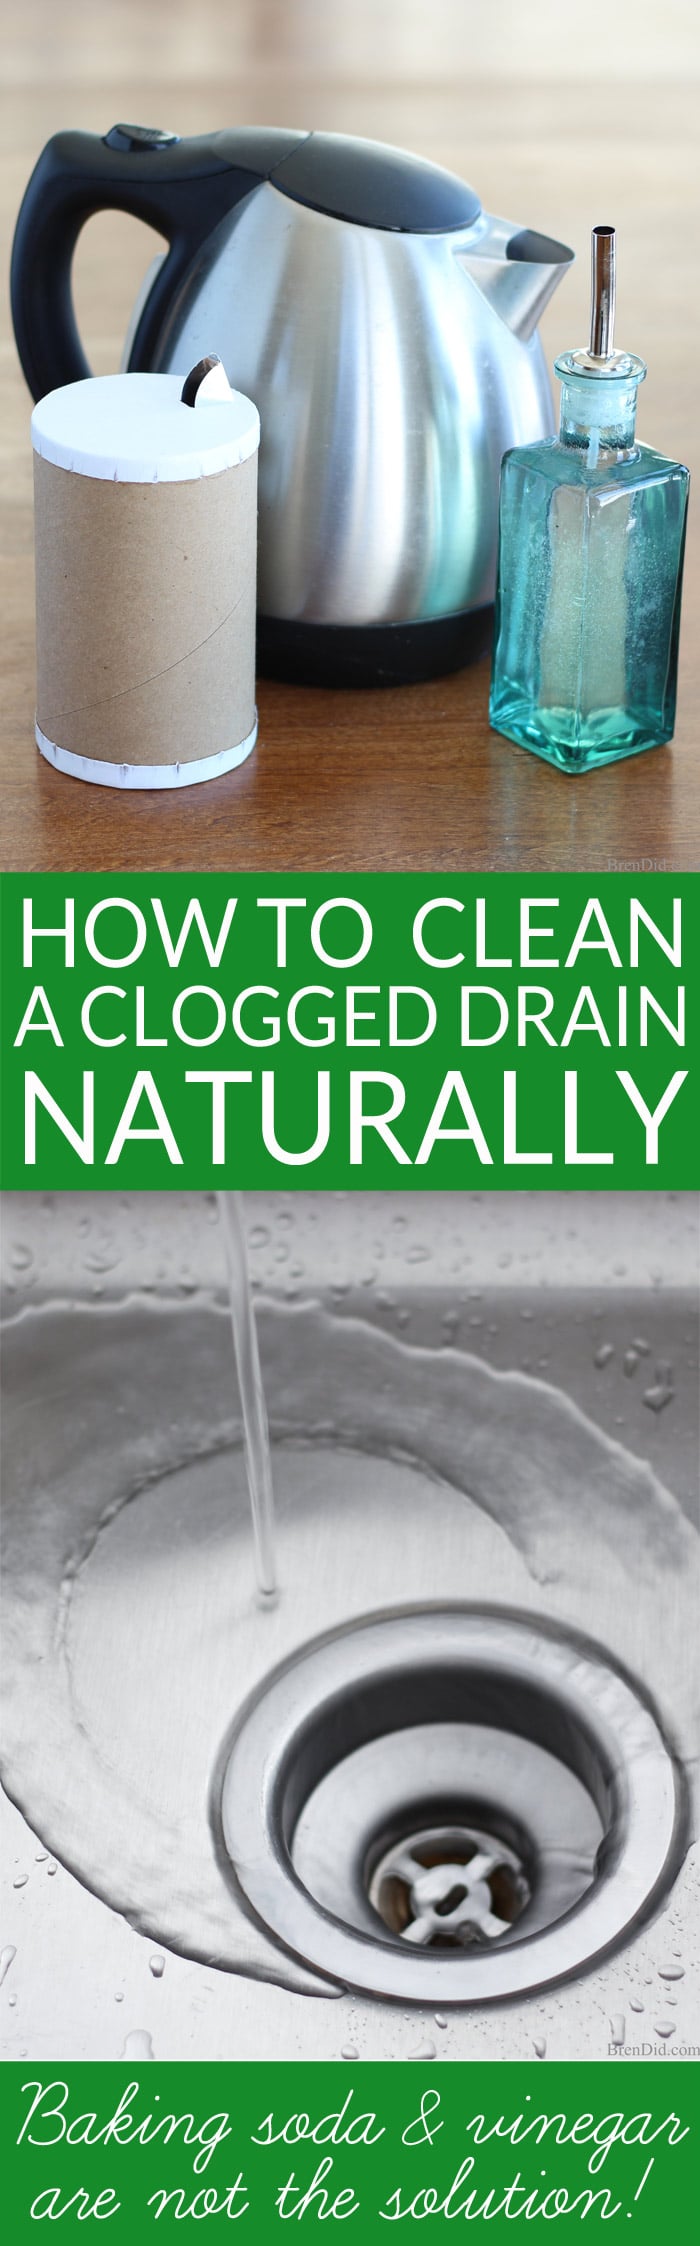 How To Naturally Clean A Clogged Drain, What Home Remedy Can I Use To Unclog My Bathtub